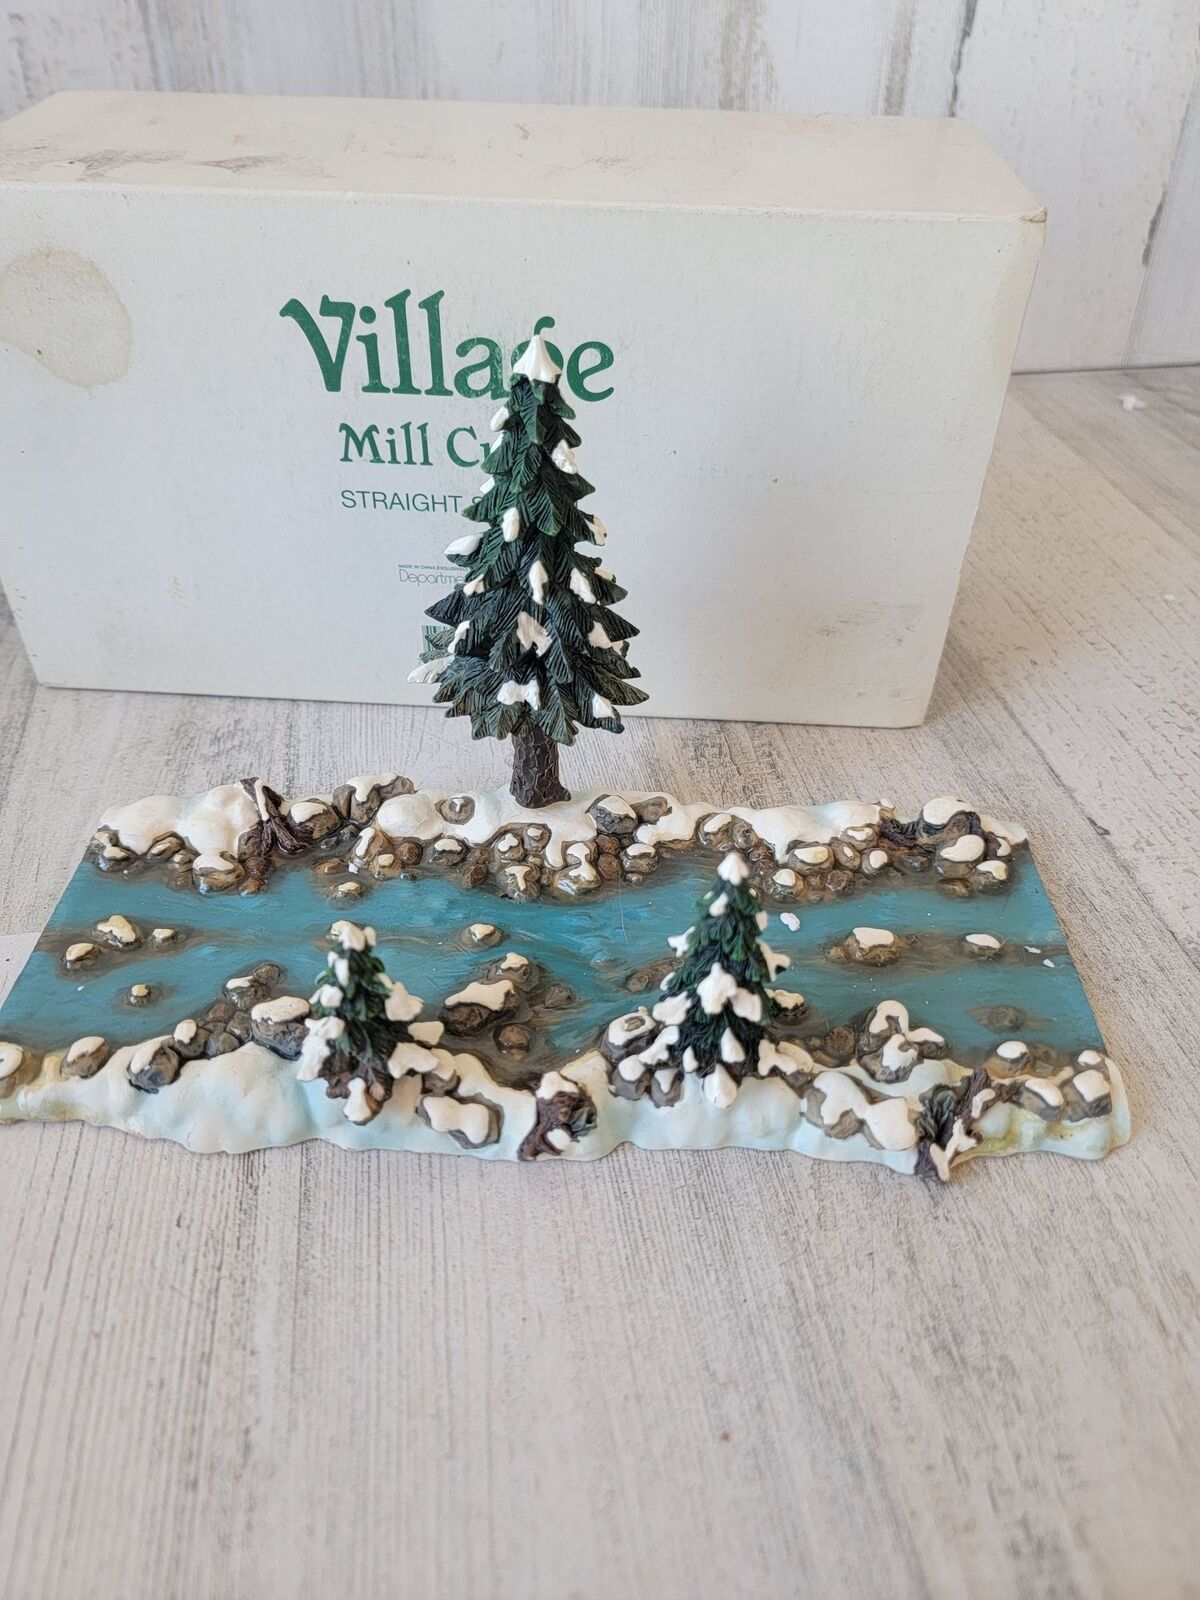 Dept 56 52633 straight section Mill creek village accessory xmas